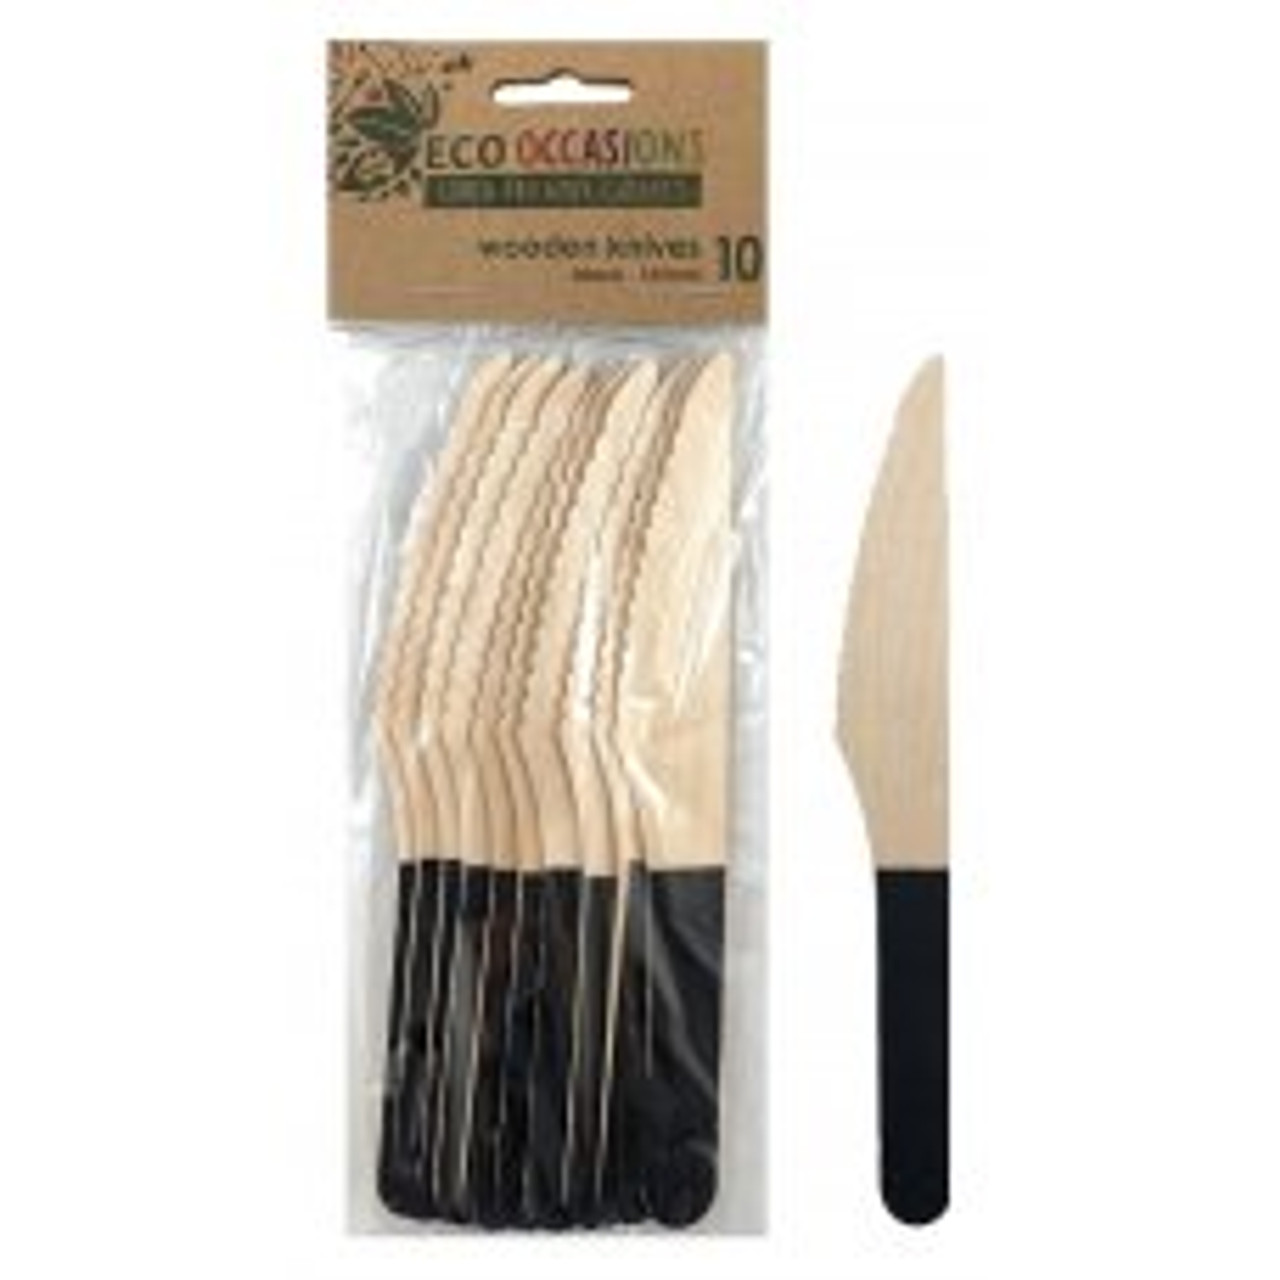 ECO WOODEN CUTLERY BLACK KNIVES P10